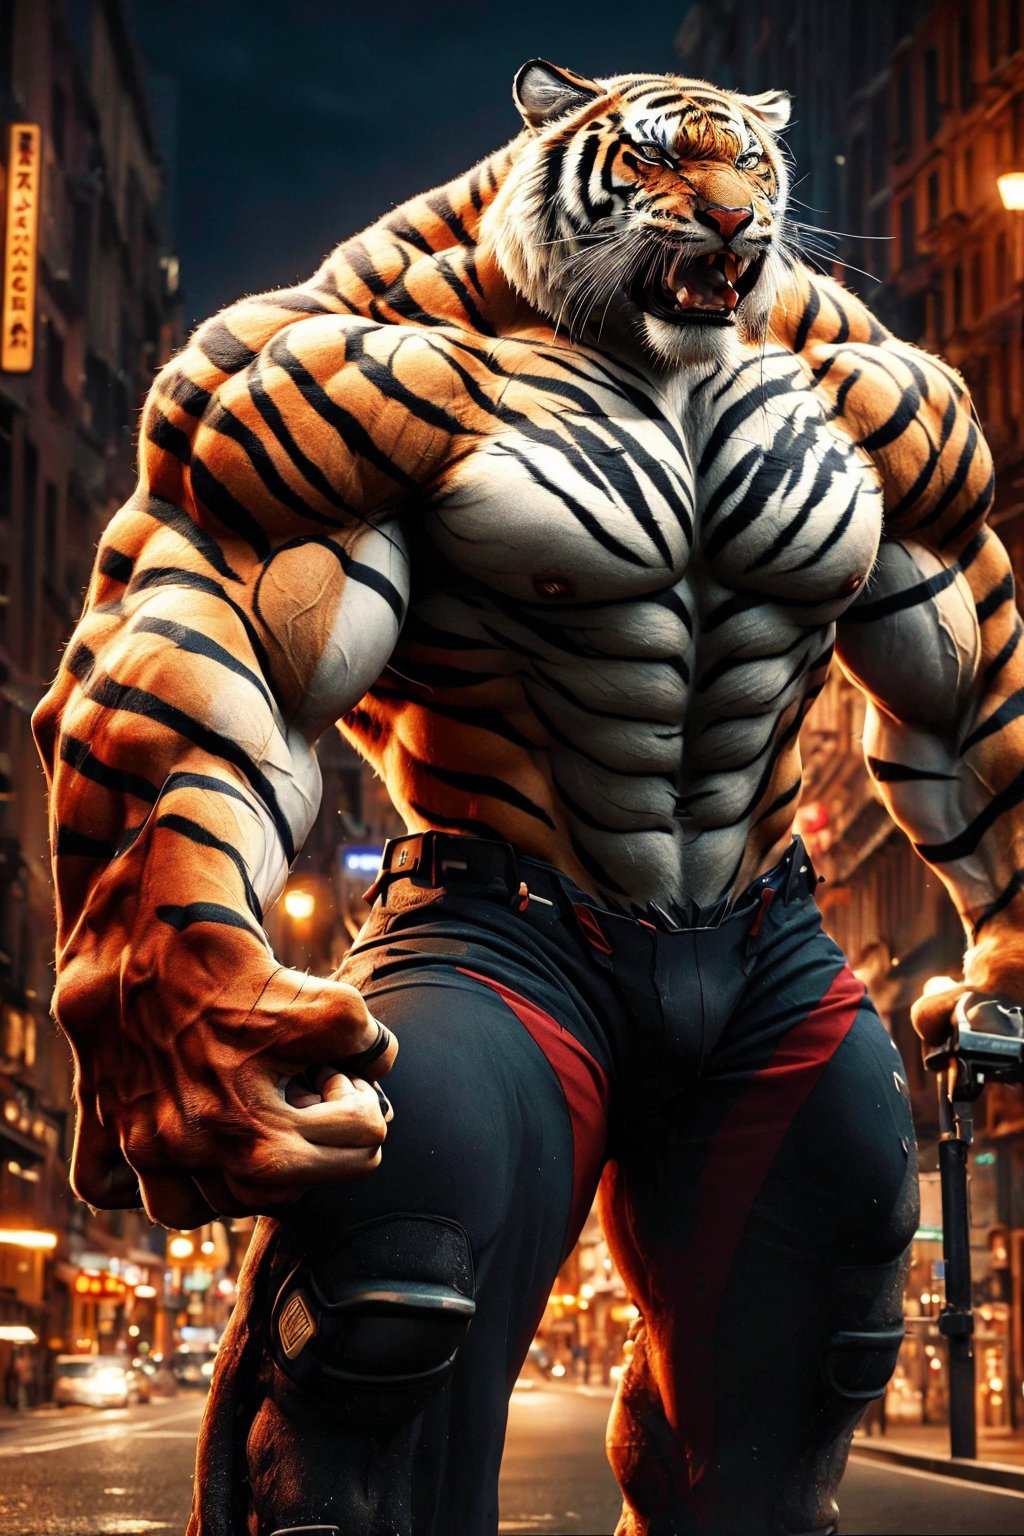 8k, masterpiece, ultra-realistic, best quality, high resolution, high definition, ,tiger boy, pants, muscular, claws, night city background